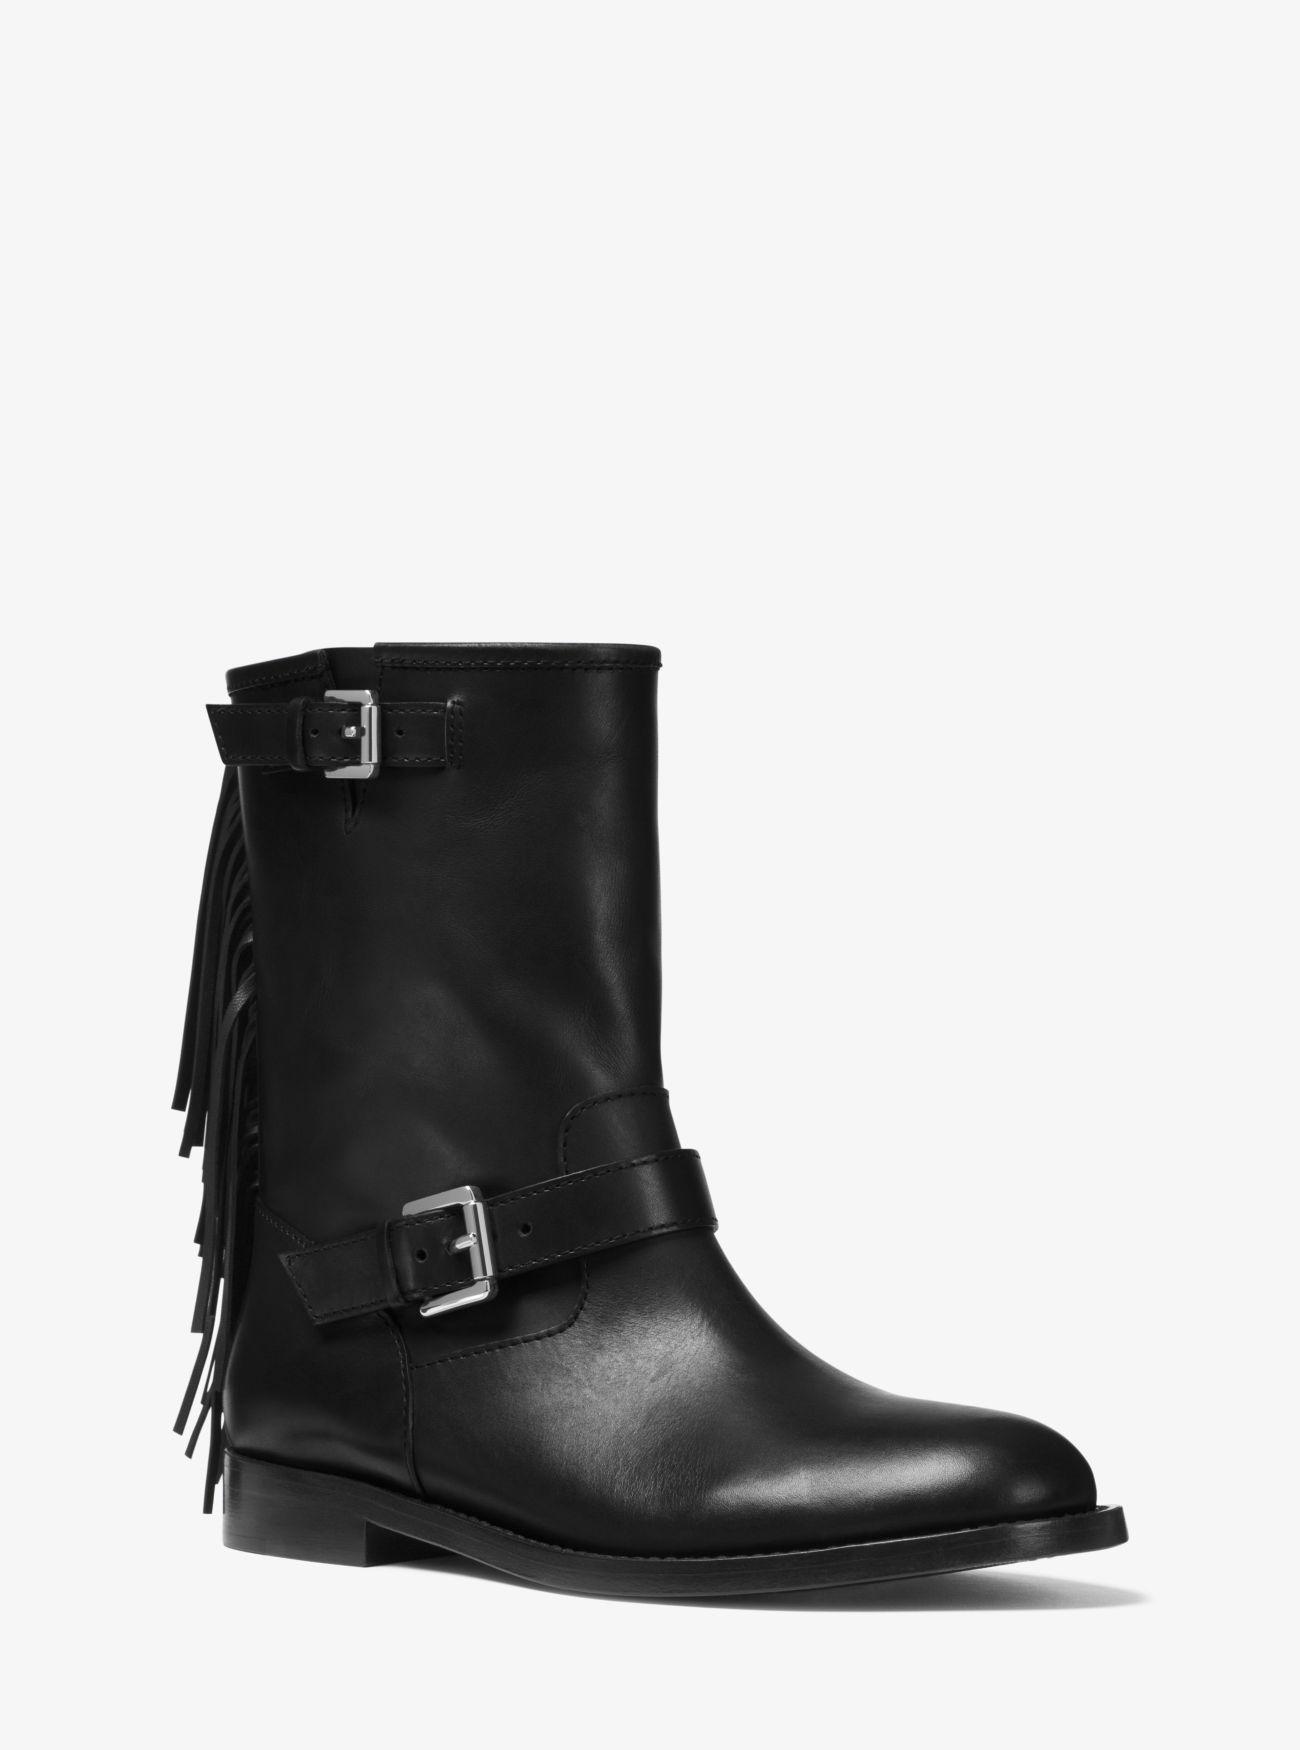 Michael Kors Ingrid Leather Boots in 